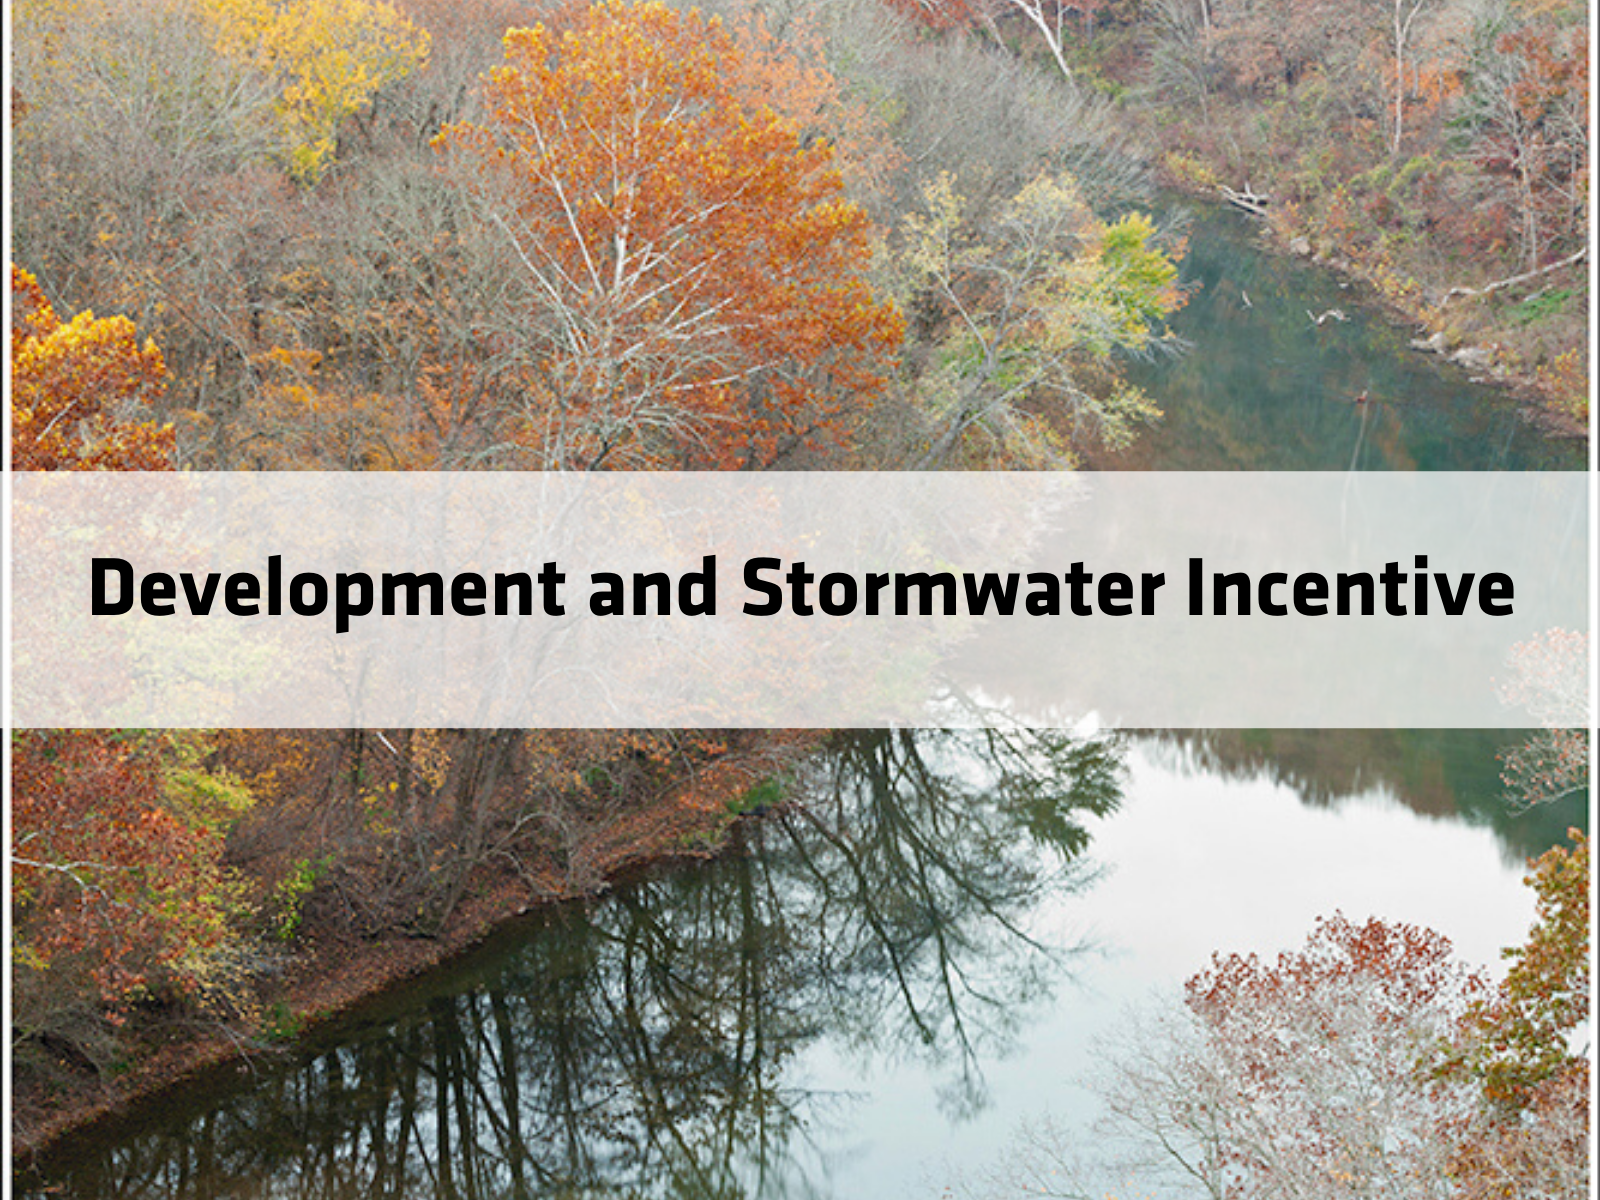 Development and Stormwater Incentives